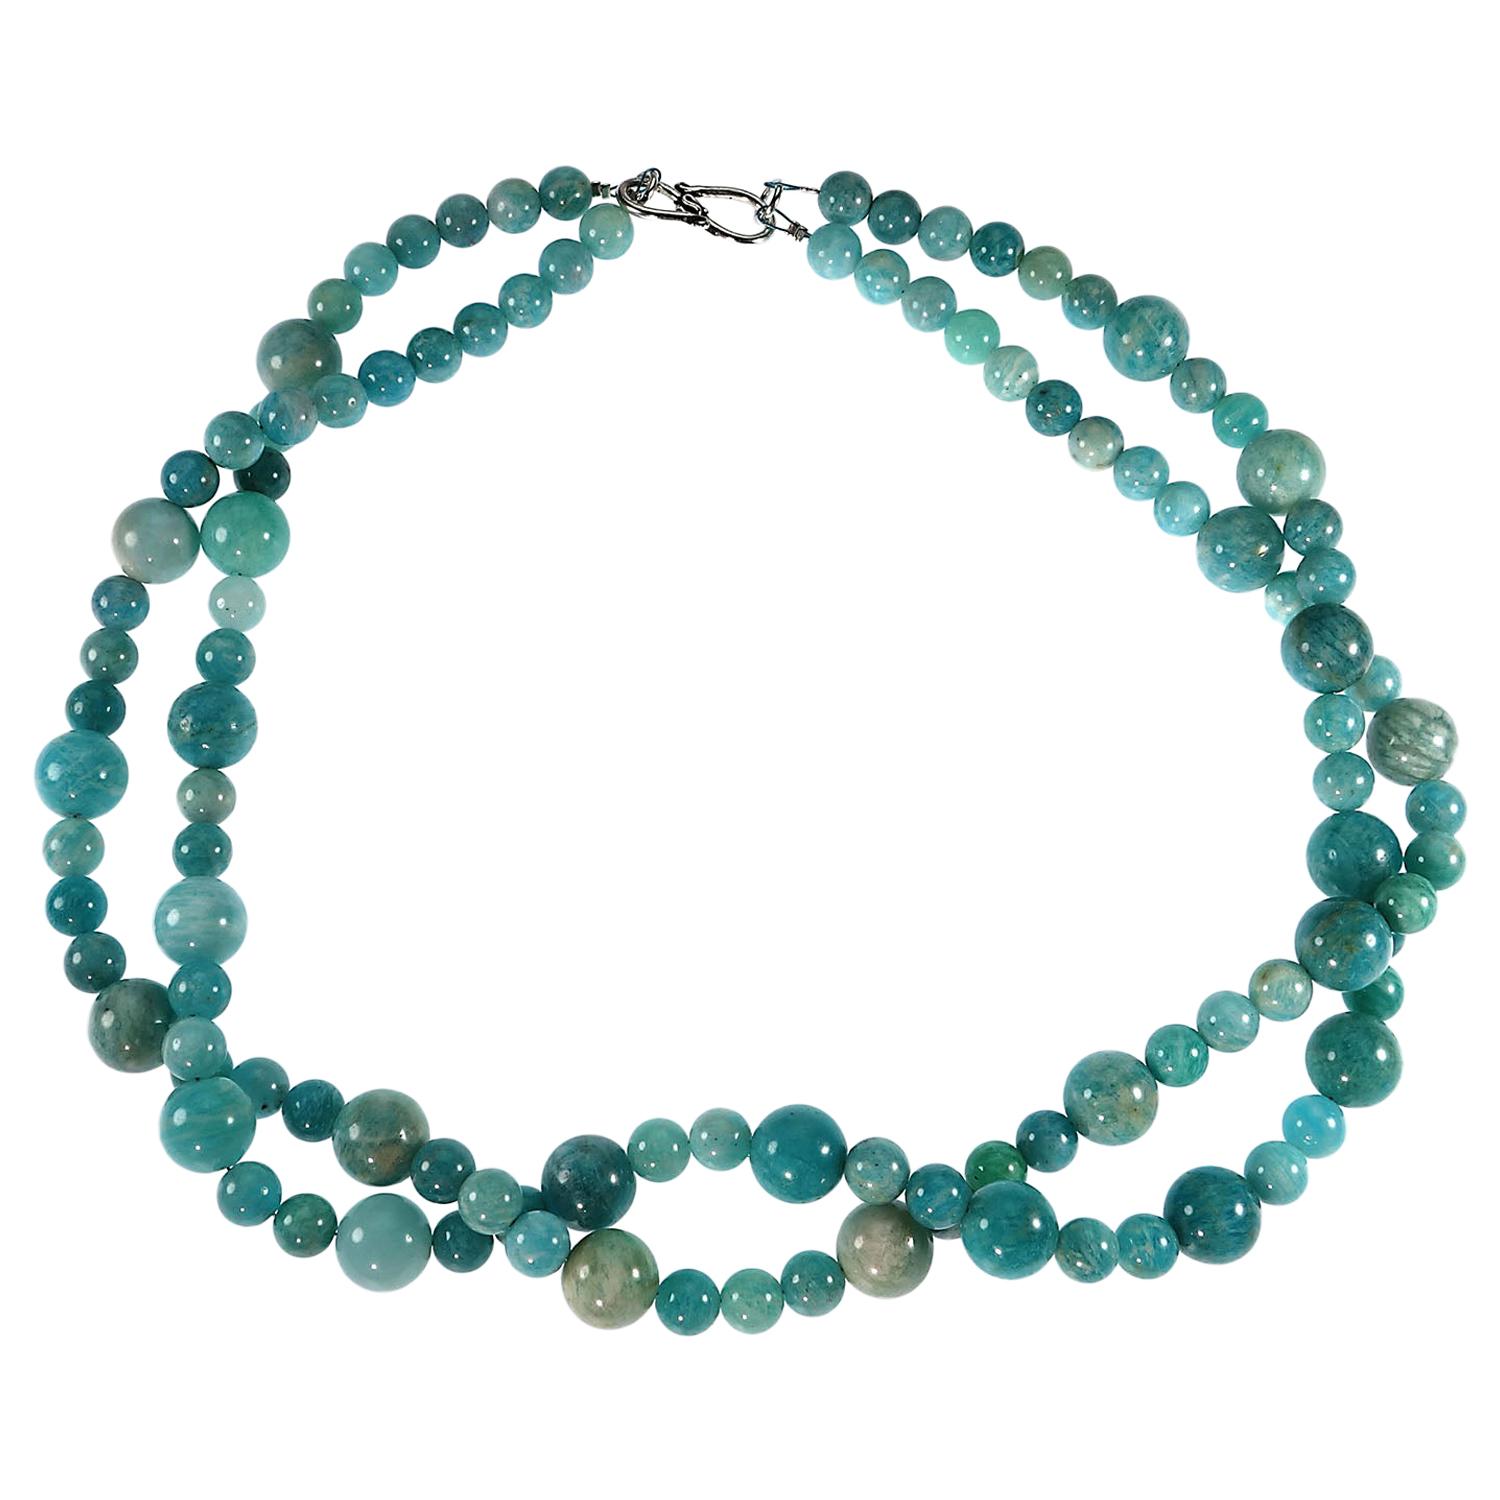 Gemjunky Double Strand Necklace of Polished Opaque Amazonite